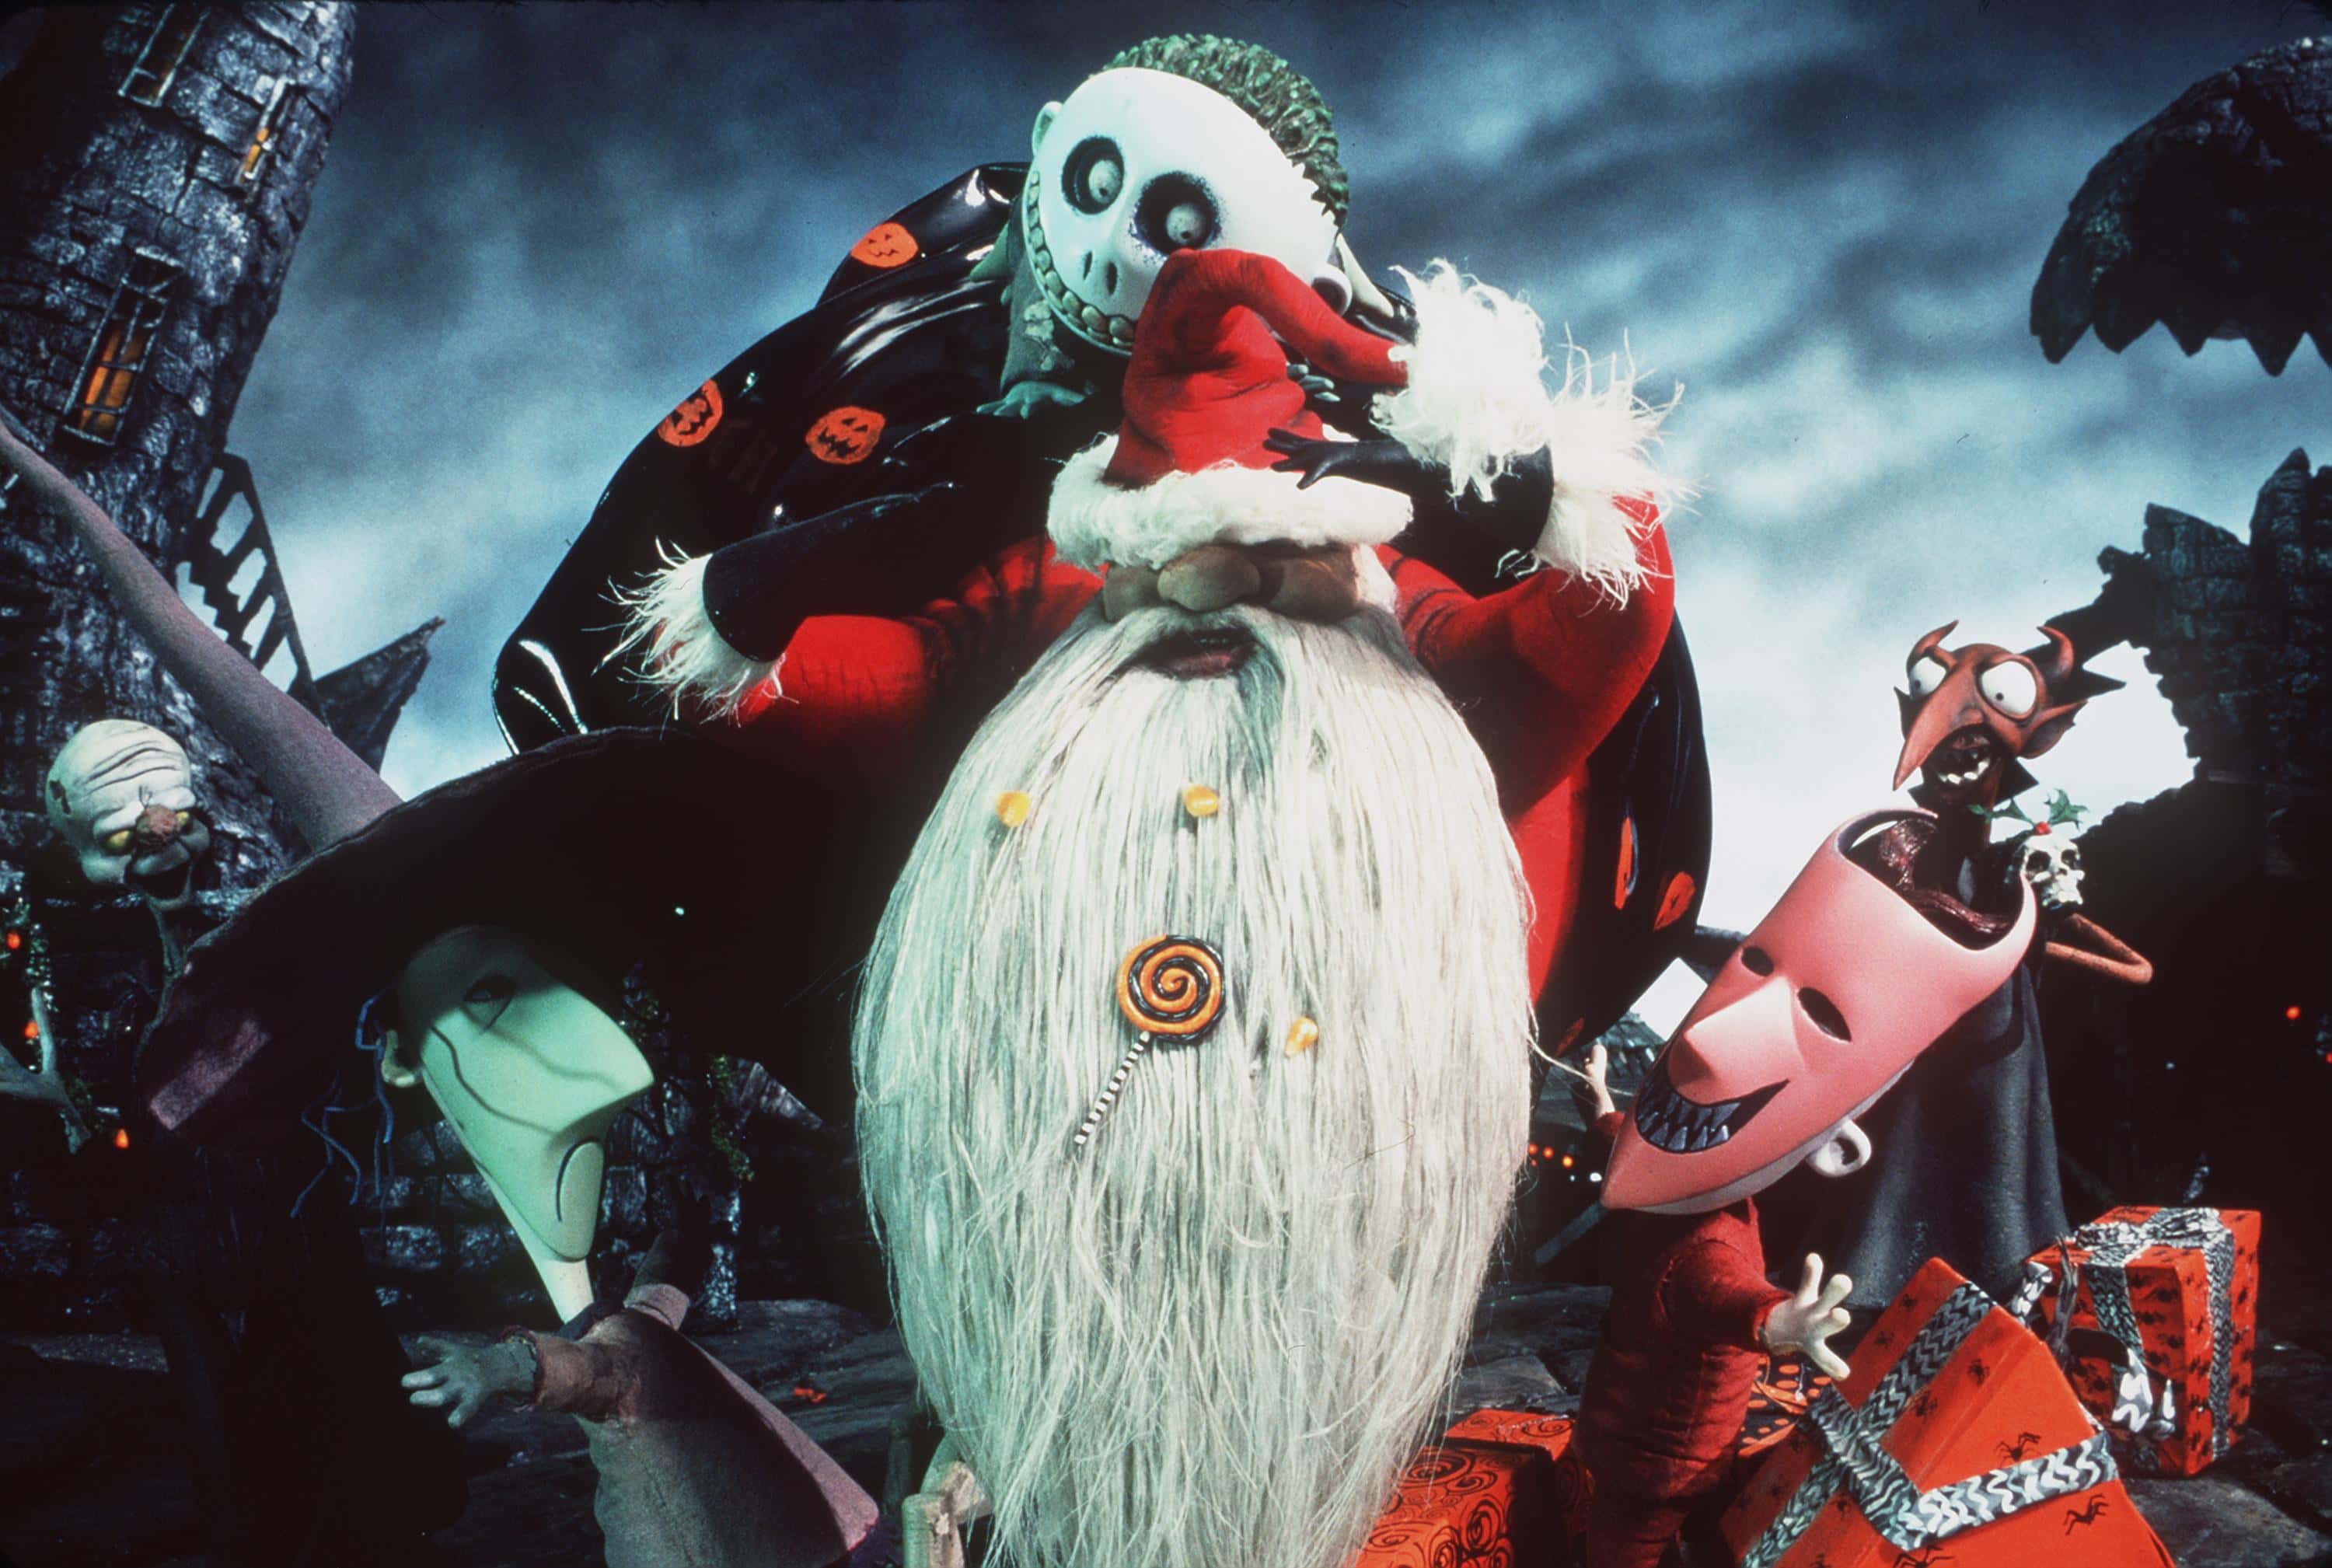 The Nightmare Before Christmas: 18 Spooky Facts About The Movie